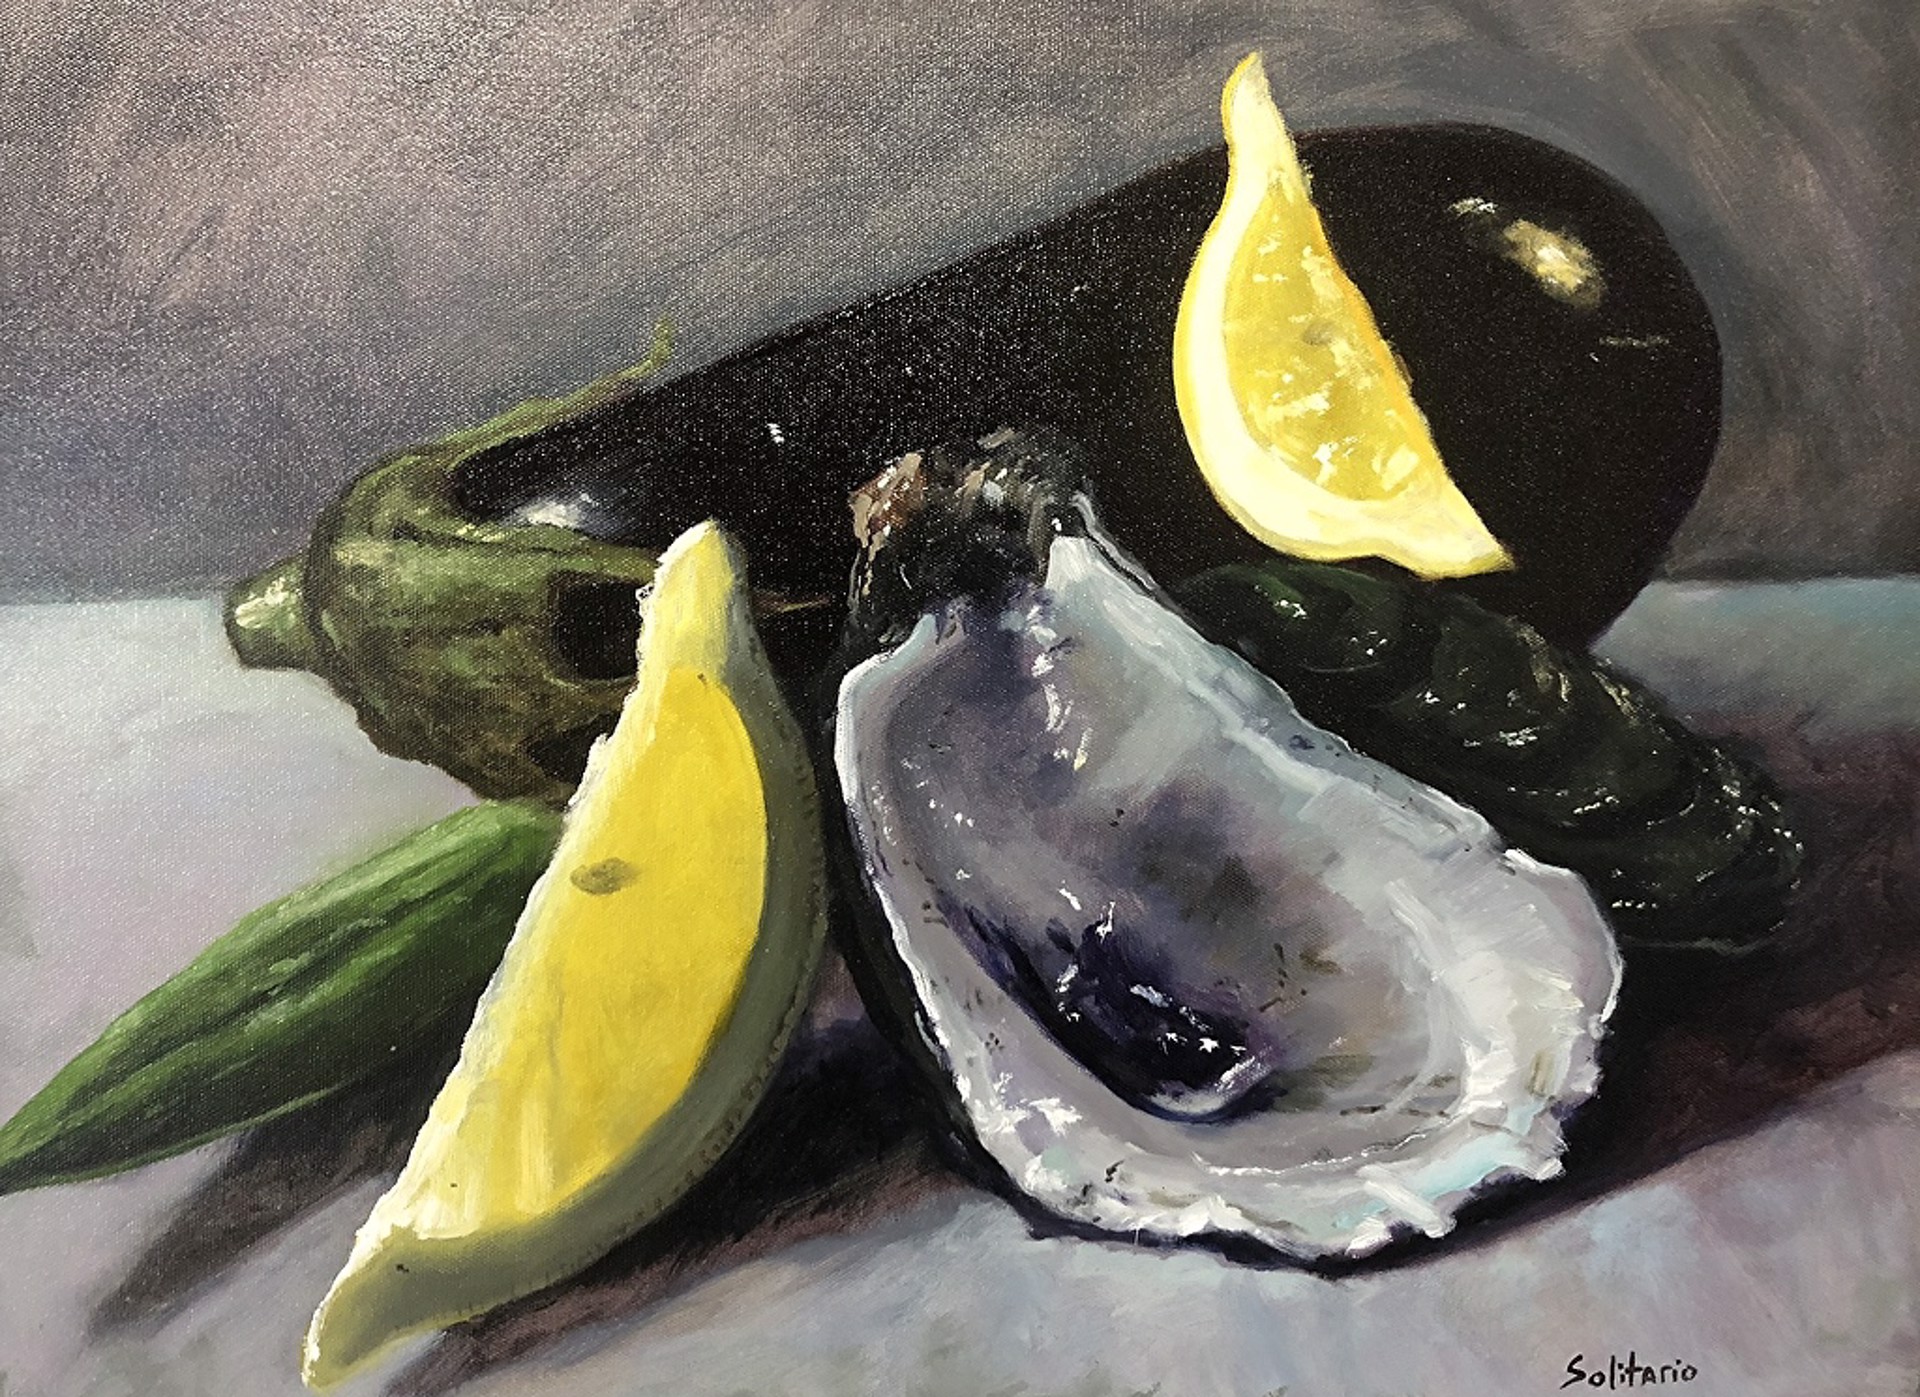 Eggplant & Oyster Shell by Billy Solitario